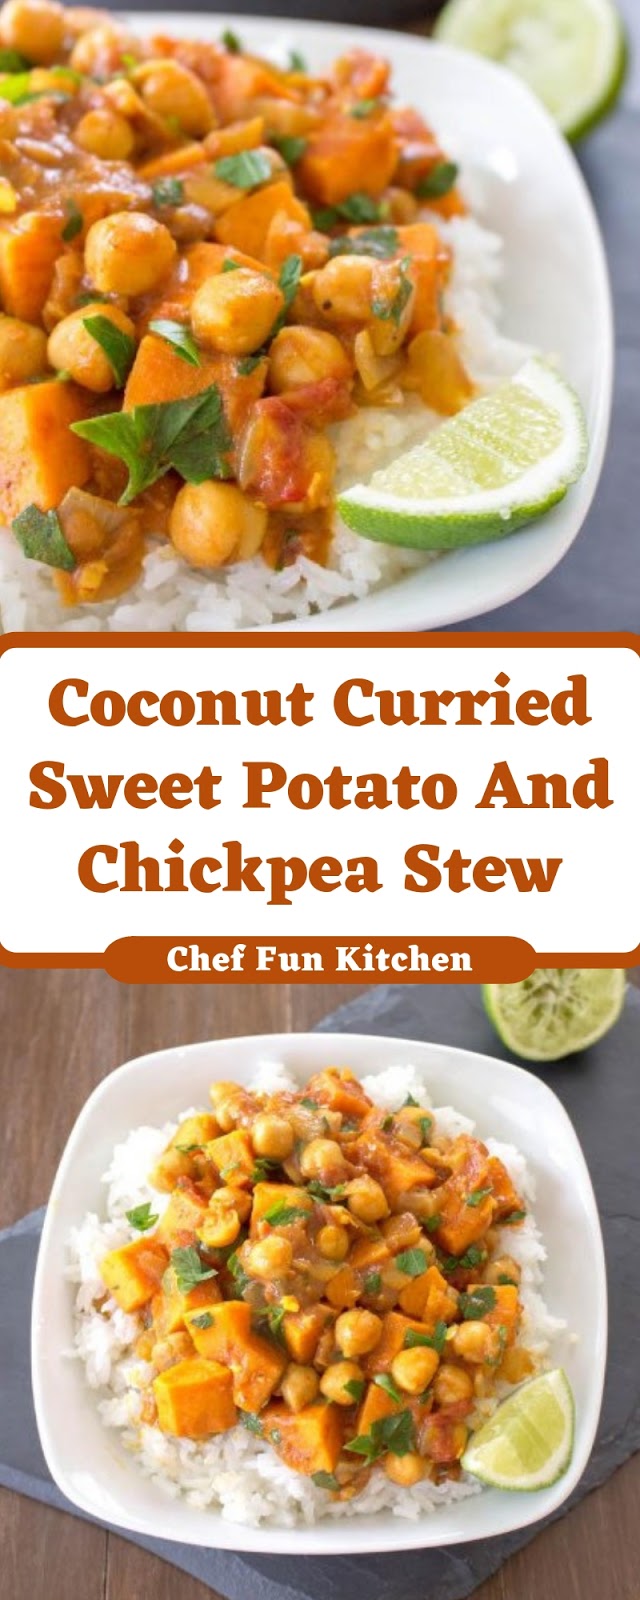 Coconut Curried Sweet Potato And Chickpea Stew